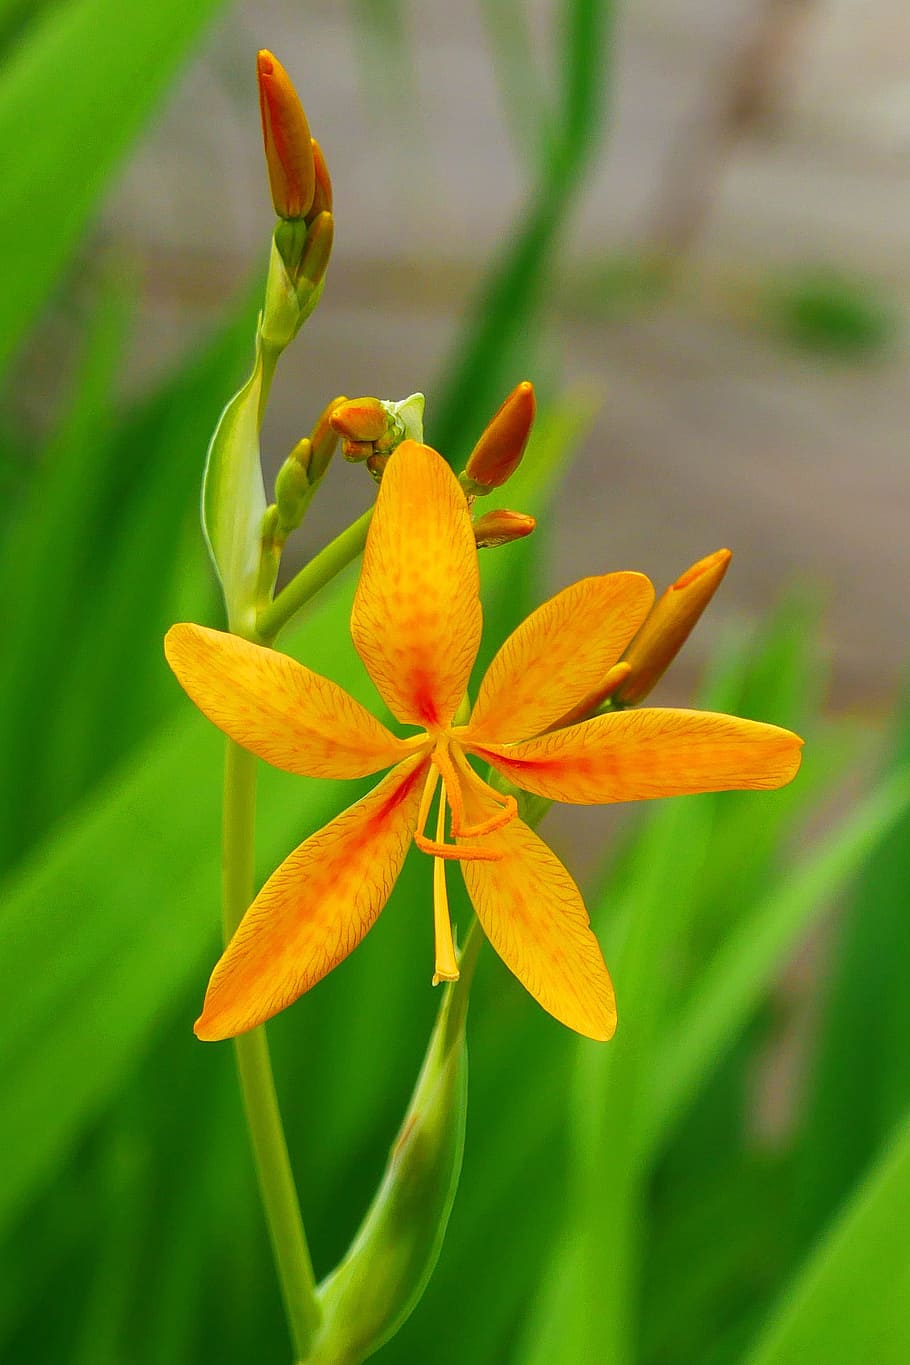 leopard flowers, green, leafy, background., buds, ornamental, plant iris domestica, commonly, known, leopard lily